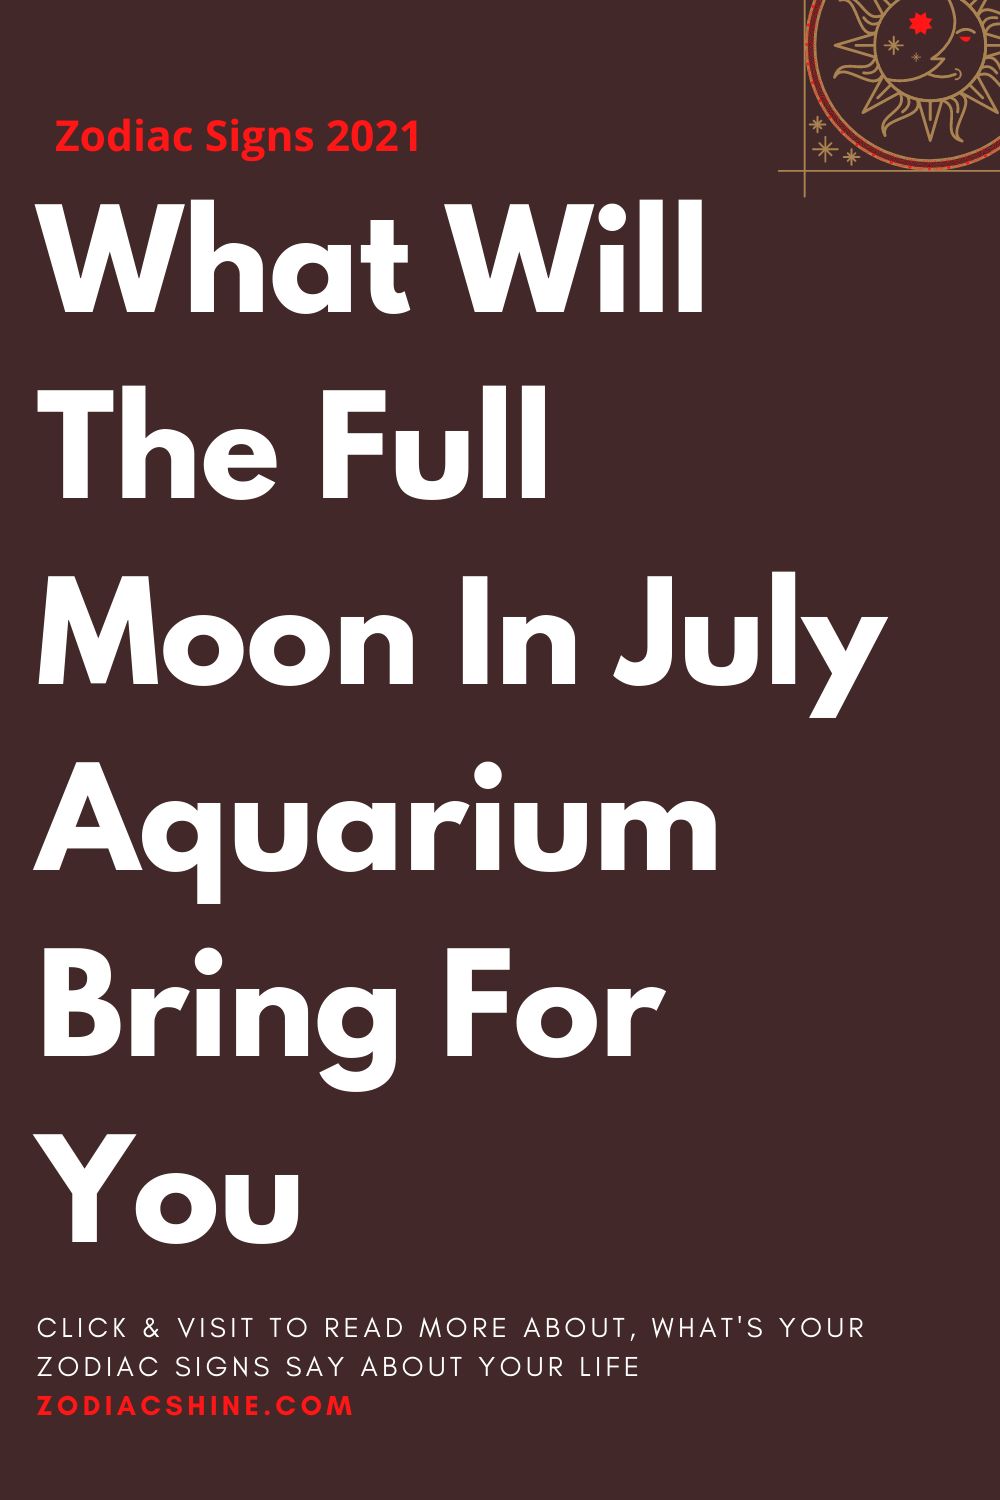 What Will The Full Moon In July Aquarium Bring For You